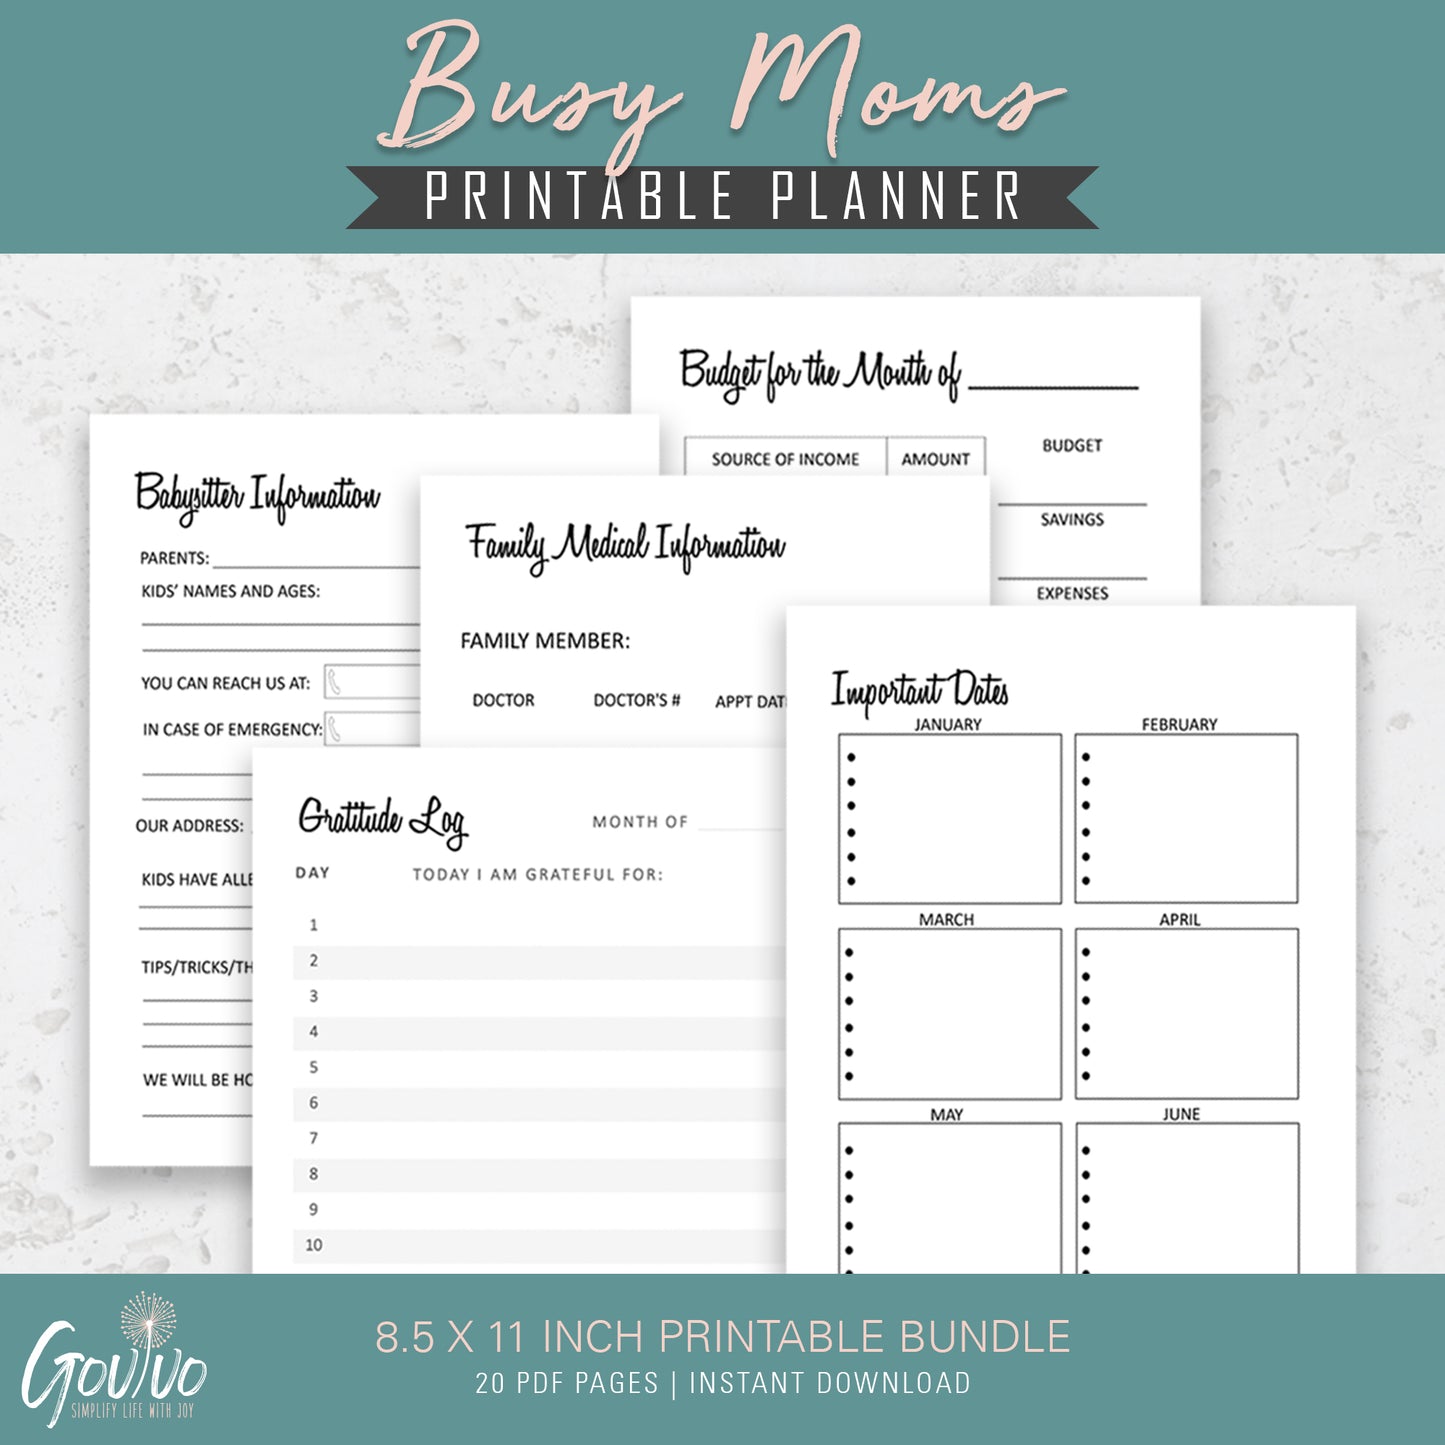 Busy Mom Planner Printable, Mom Planner, Budget Planner, Meal and Grocery Planner, Recipe Planner, Instant Download, Printable Meal Planner